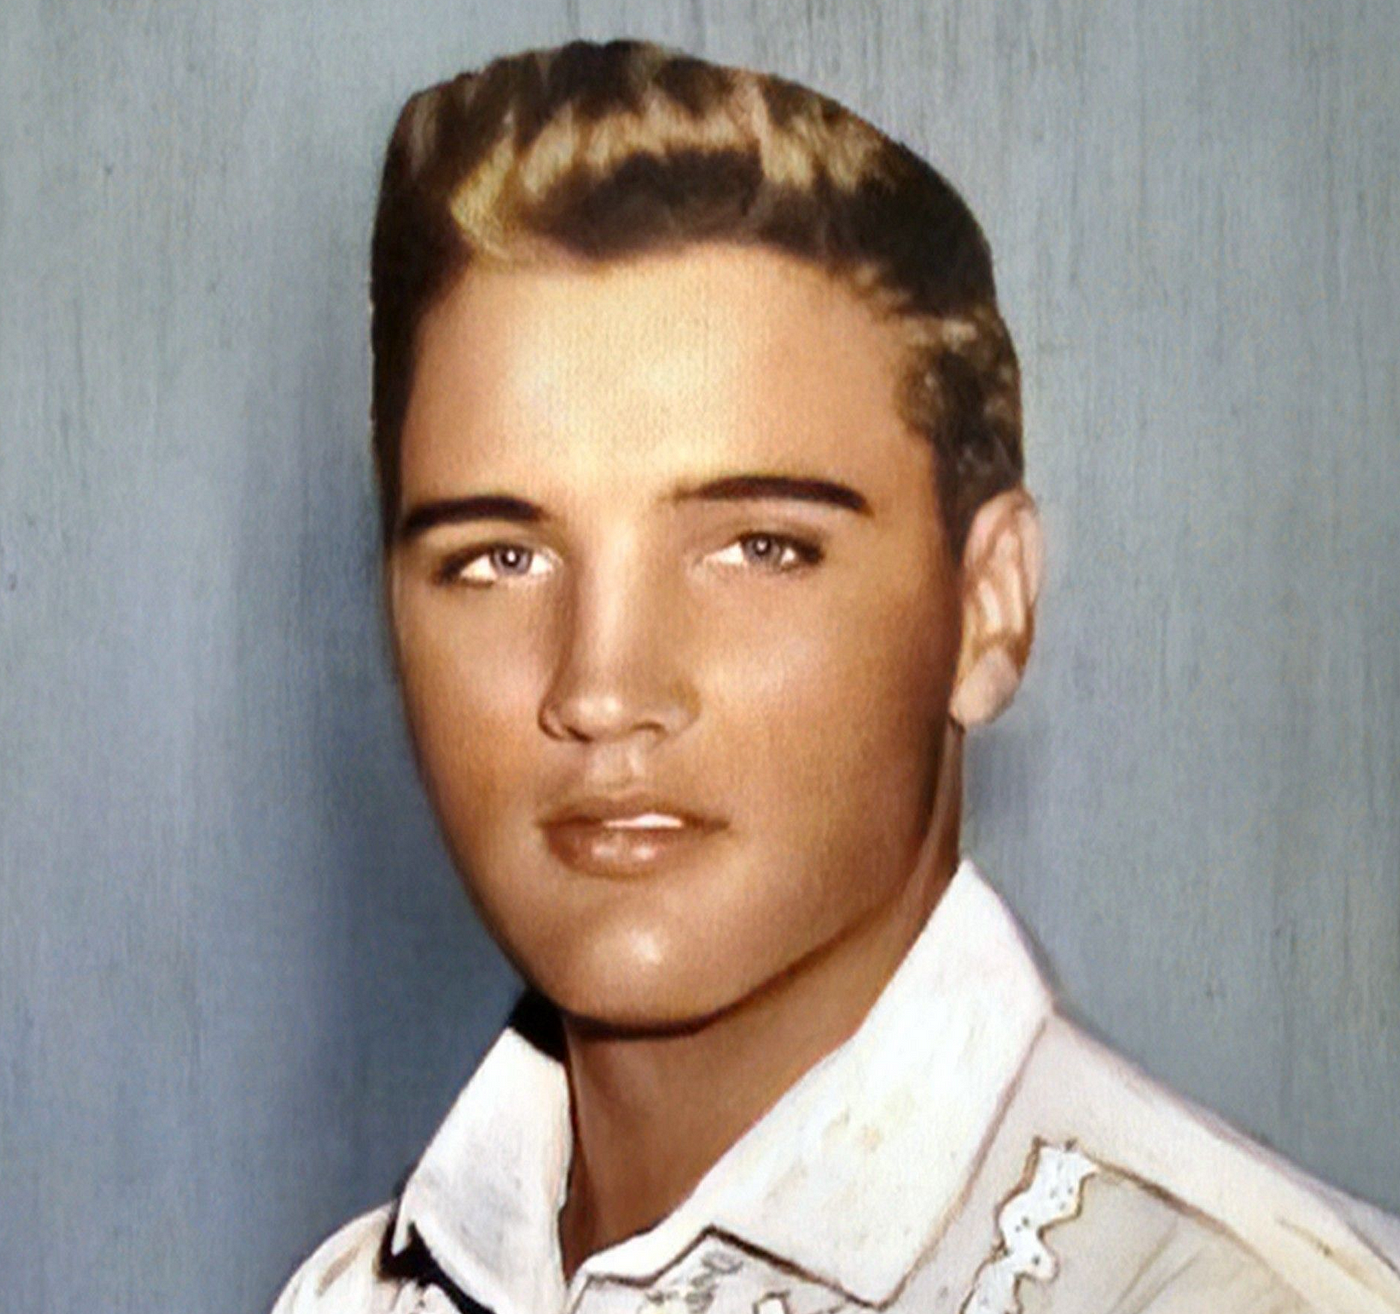 The sexuality of Elvis Presley pic